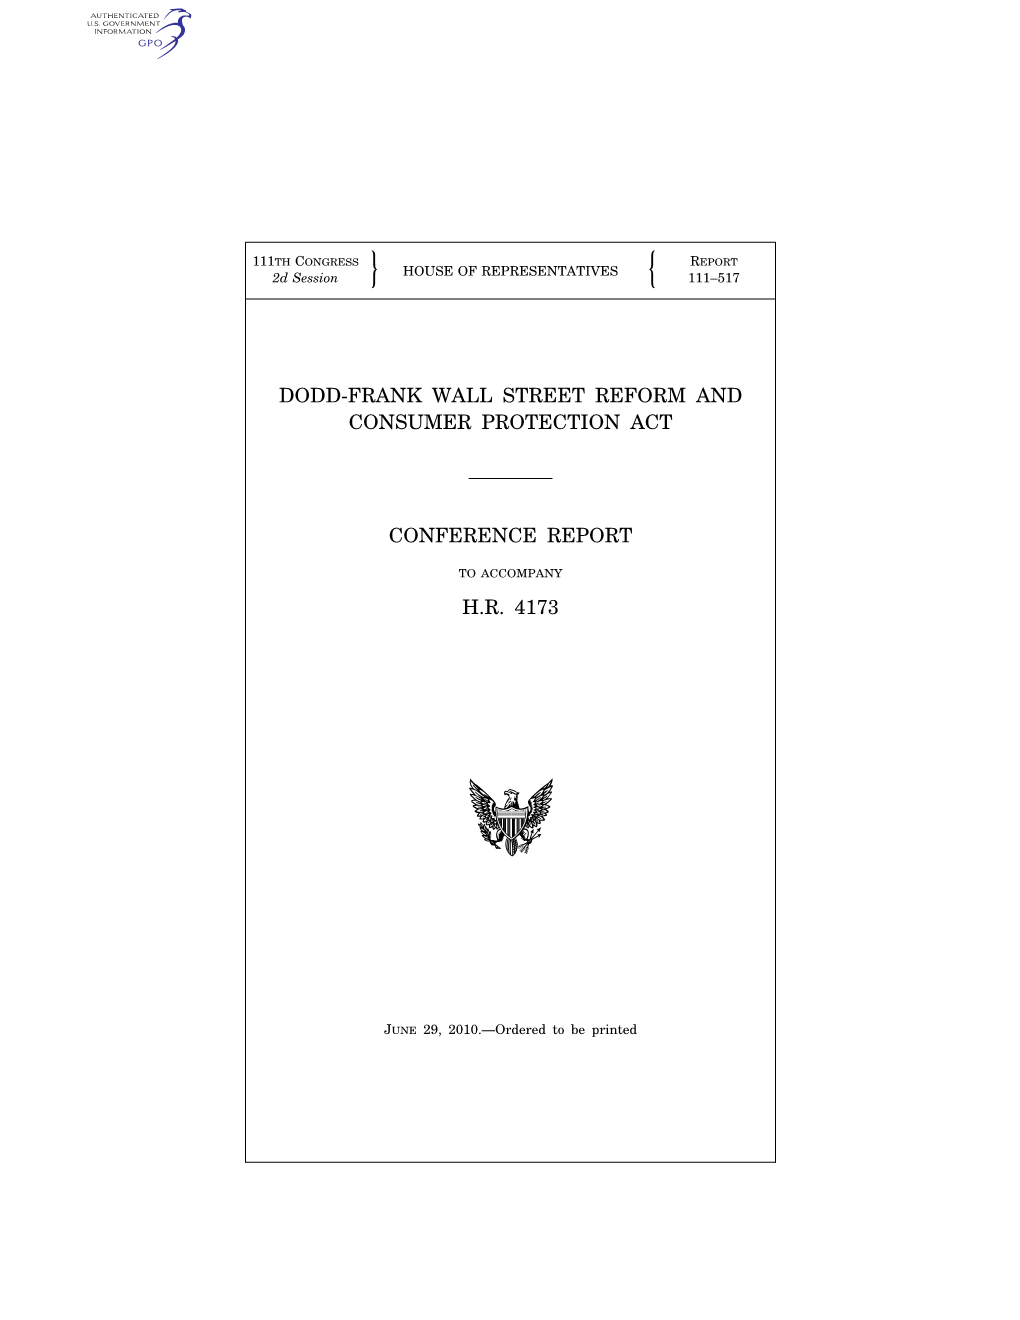 Dodd-Frank Wall Street Reform and Consumer Protection Act Conference Report H.R. 4173